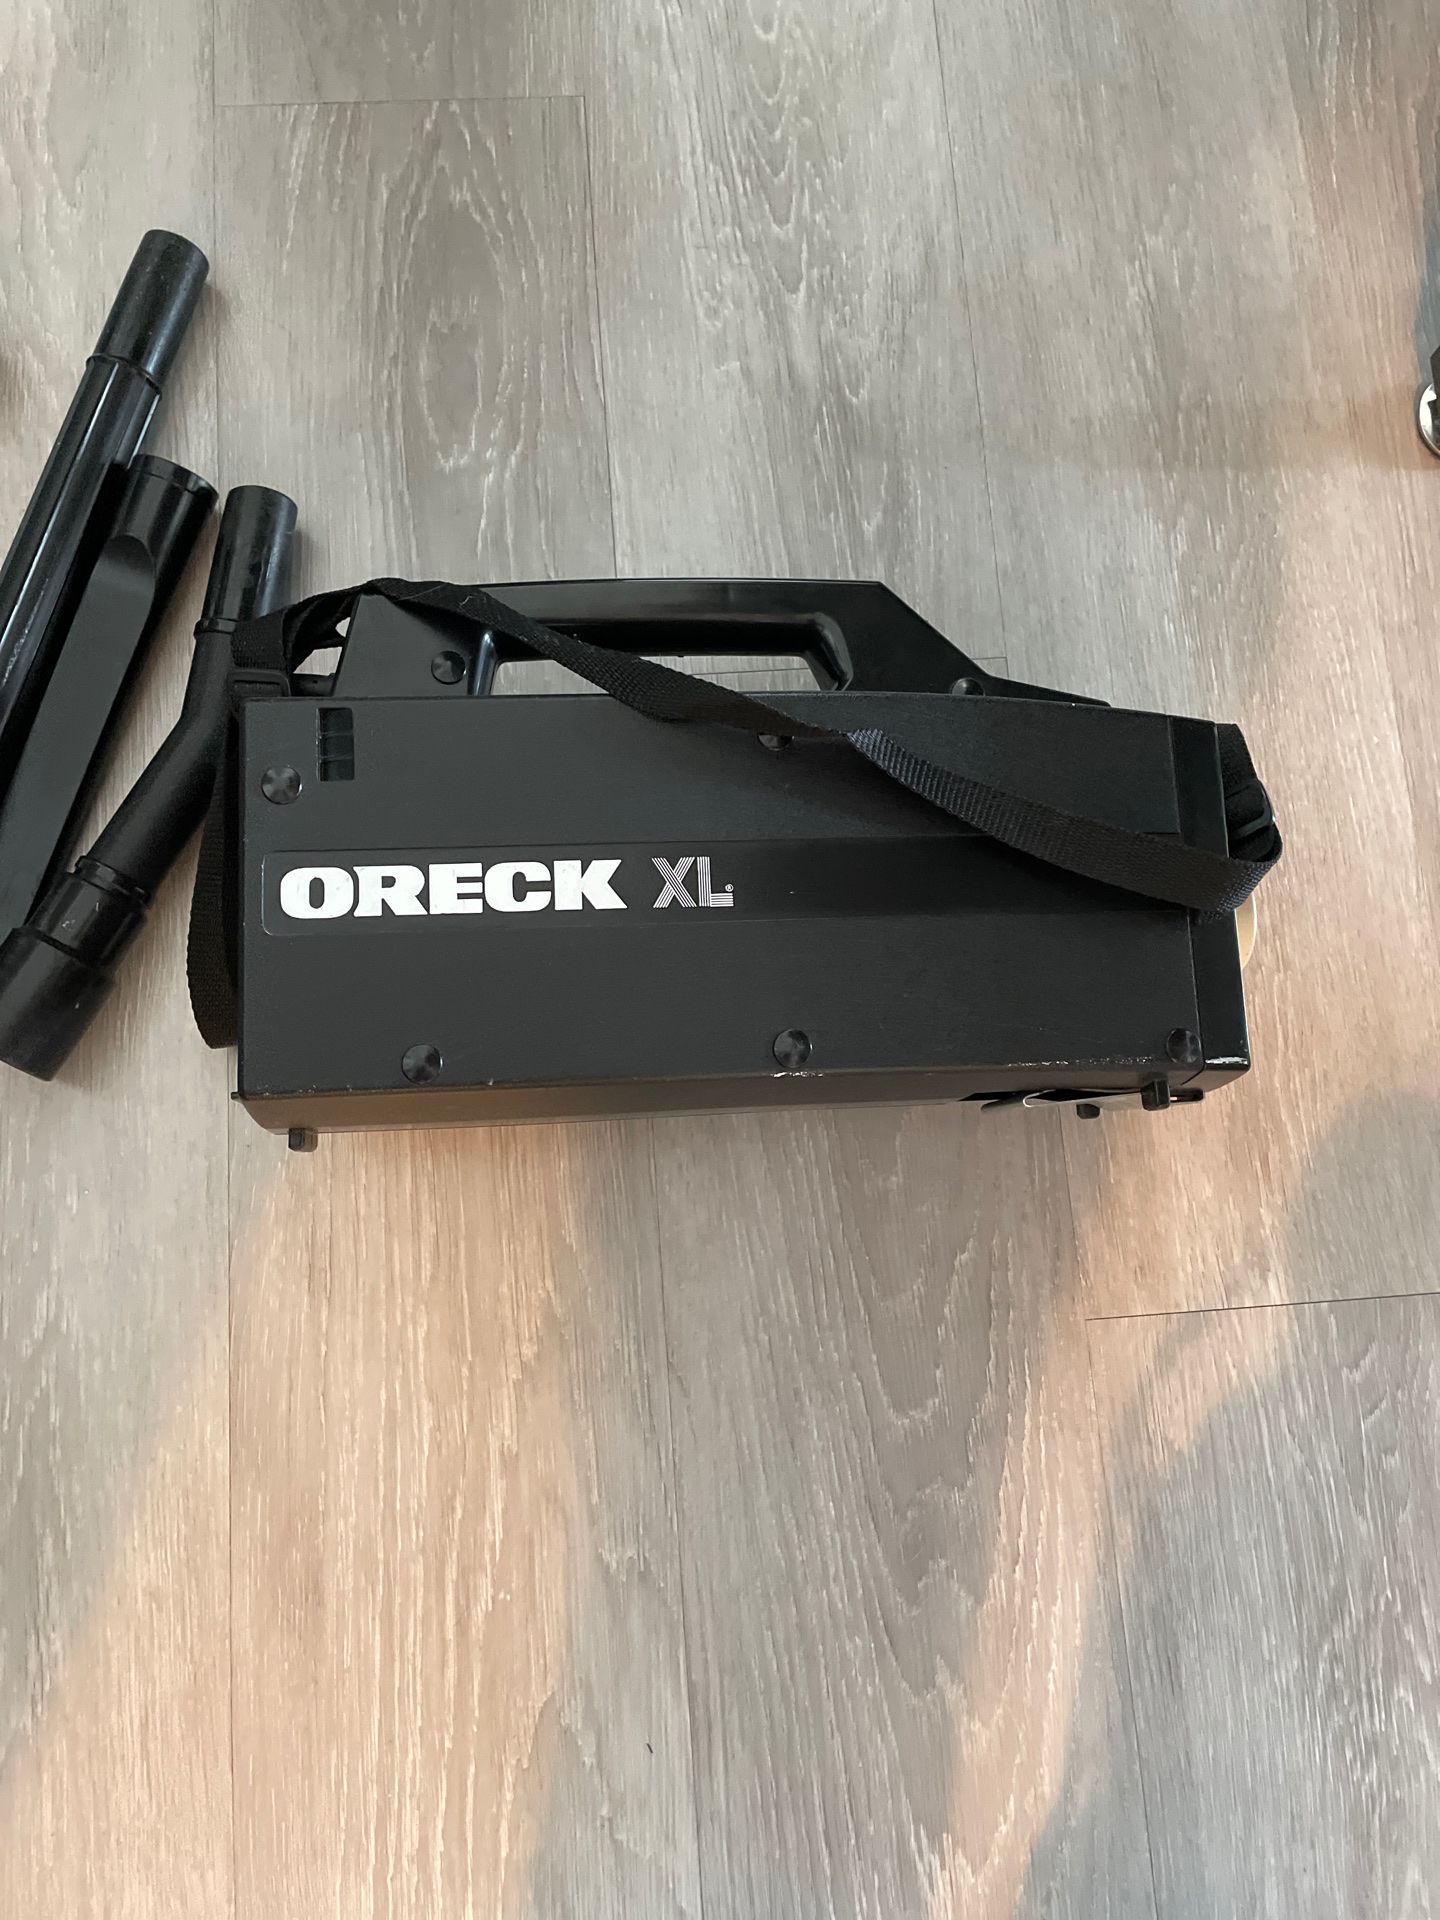 Oreck XL compact canister vacuum